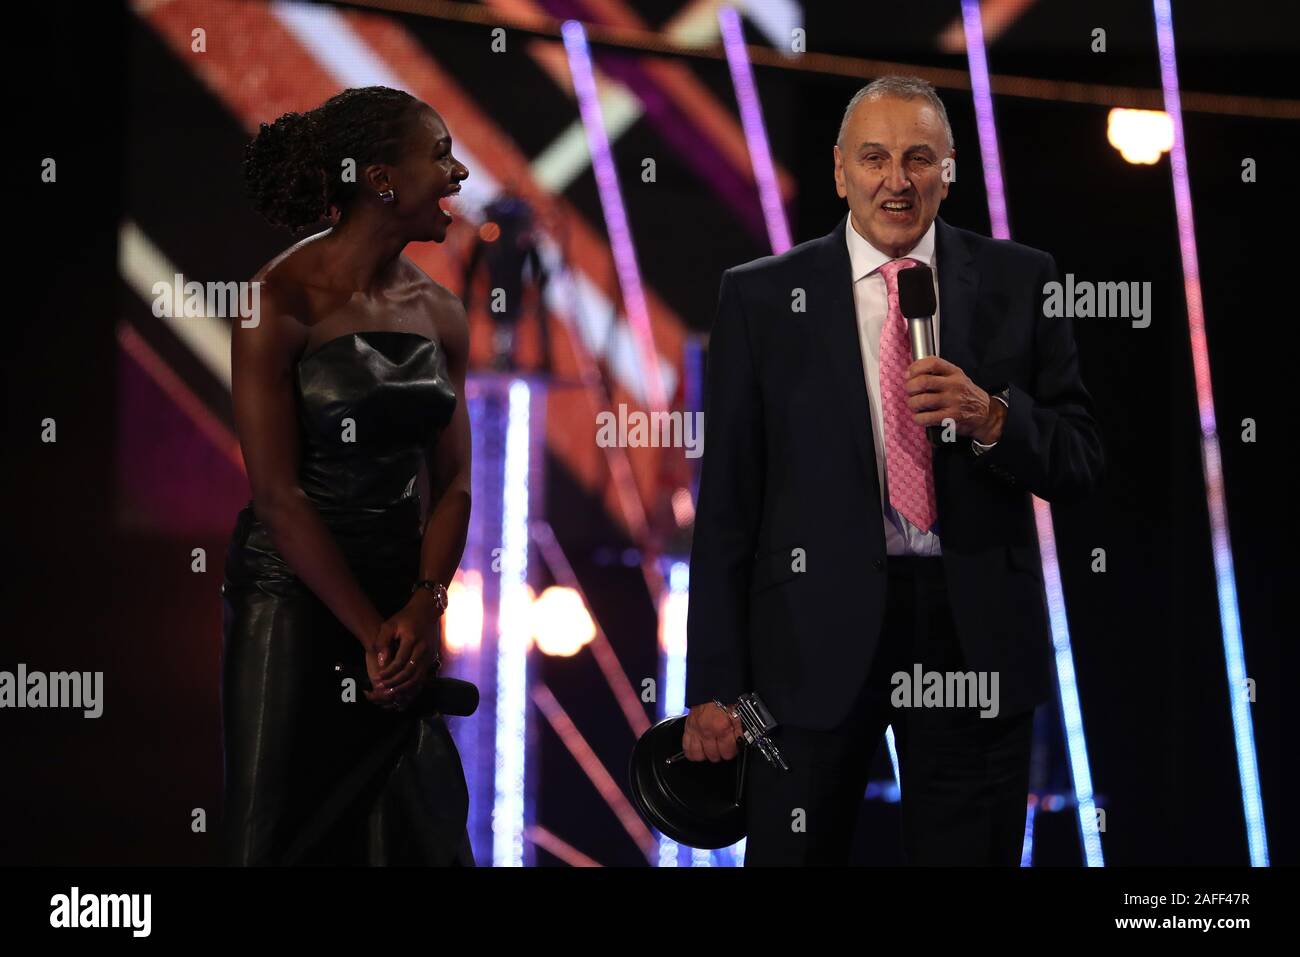 John Blackie (right) with his Coach of the Year Award alongside Dina Asher Smith during the BBC Sports Personality of the Year 2019 at The P&J Live, Aberdeen. Stock Photo